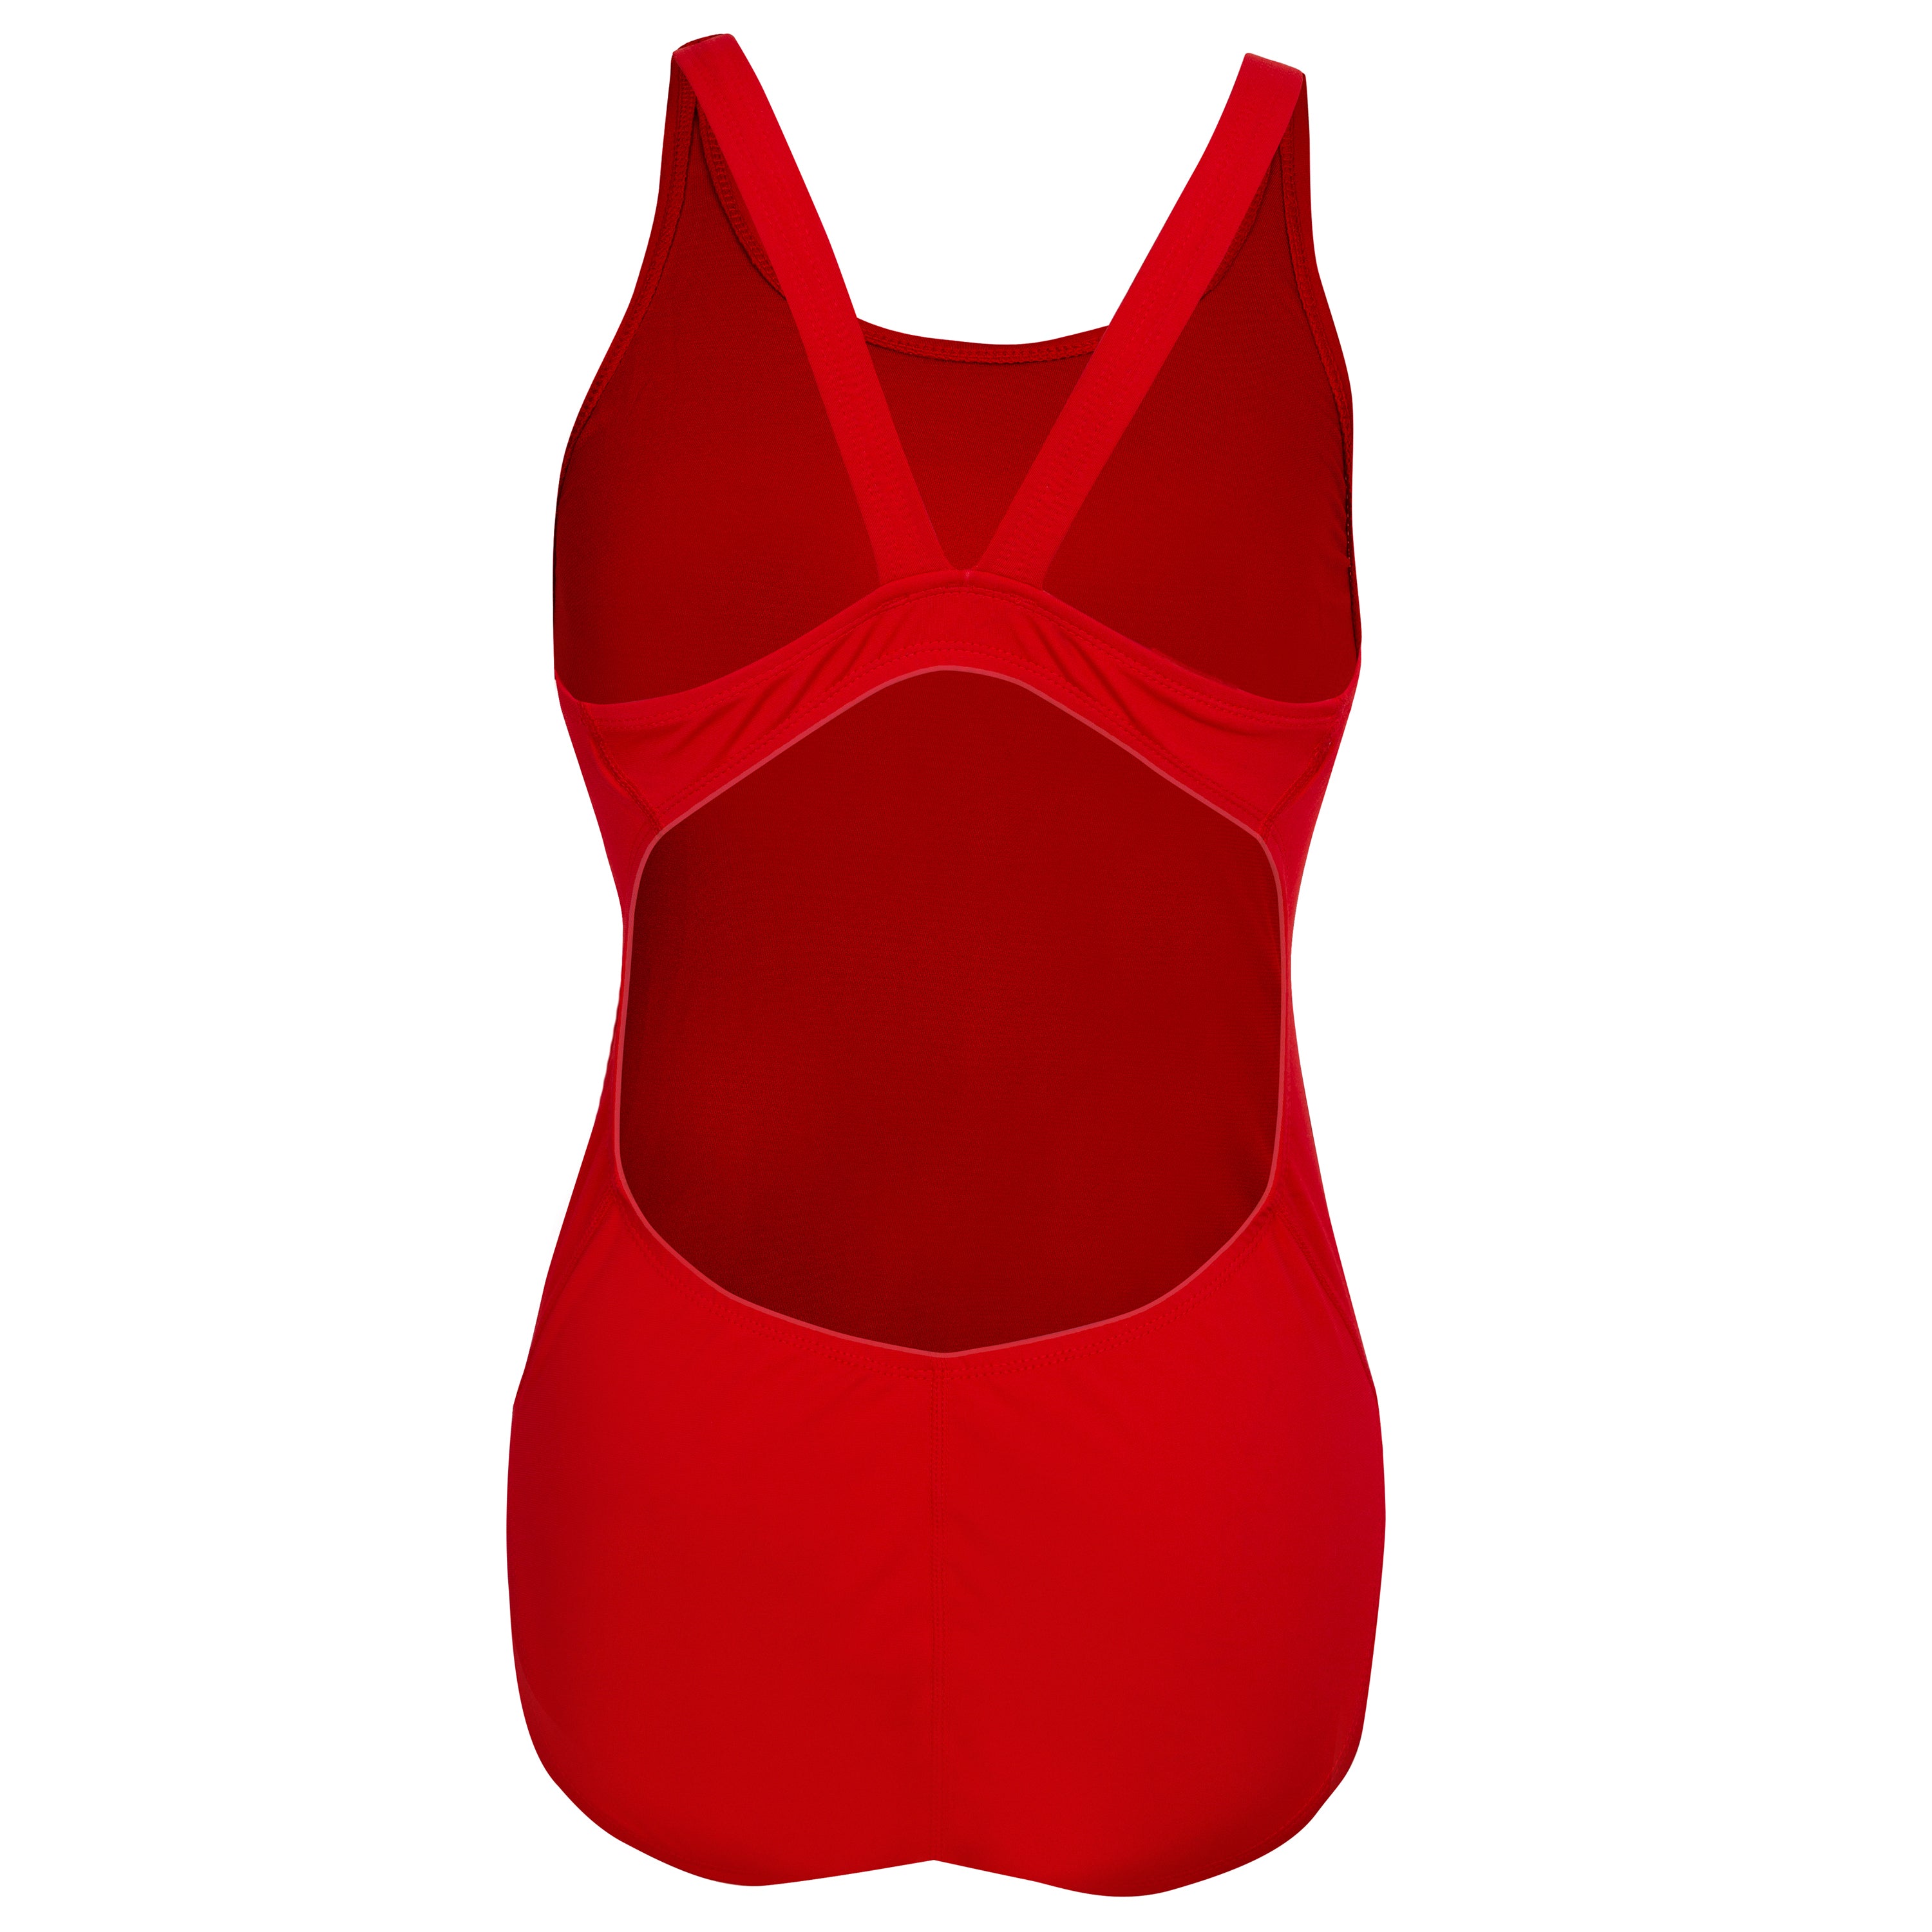 What is a Shelf Bra in Swimsuits?